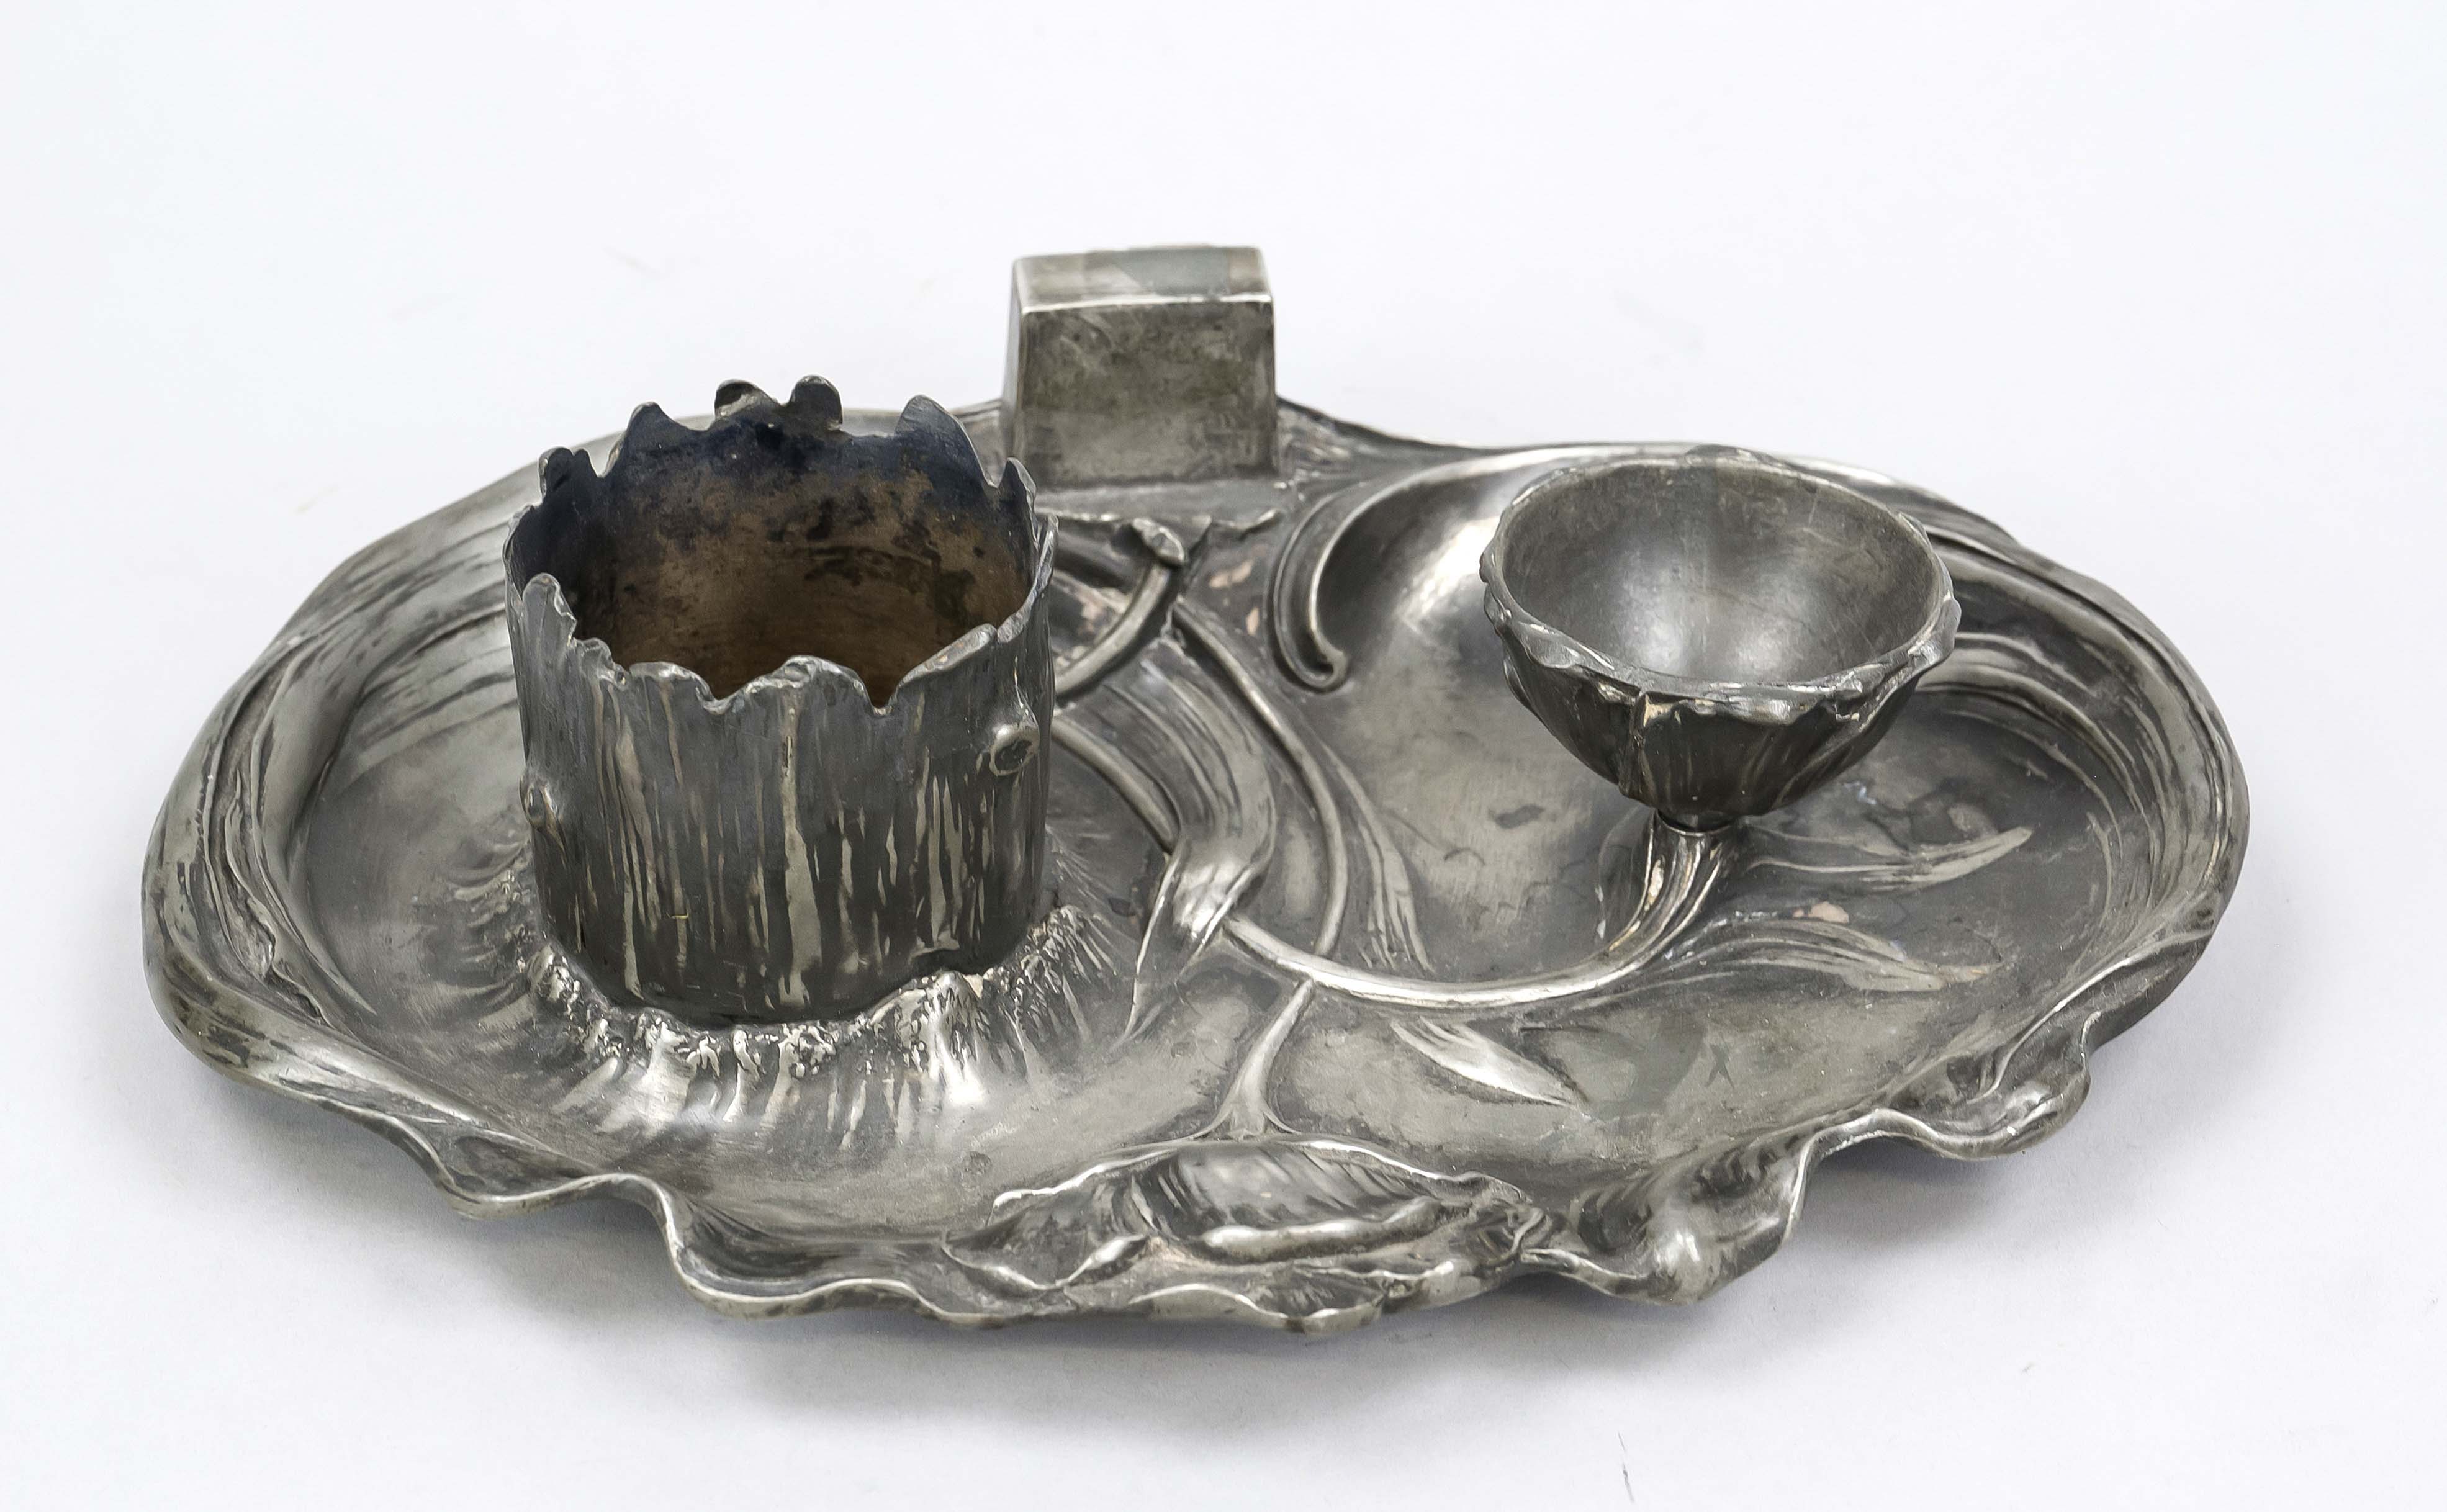 Art Nouveau smoking set, around 1900, pewter. Organically shaped bowl with floral relief, hollow